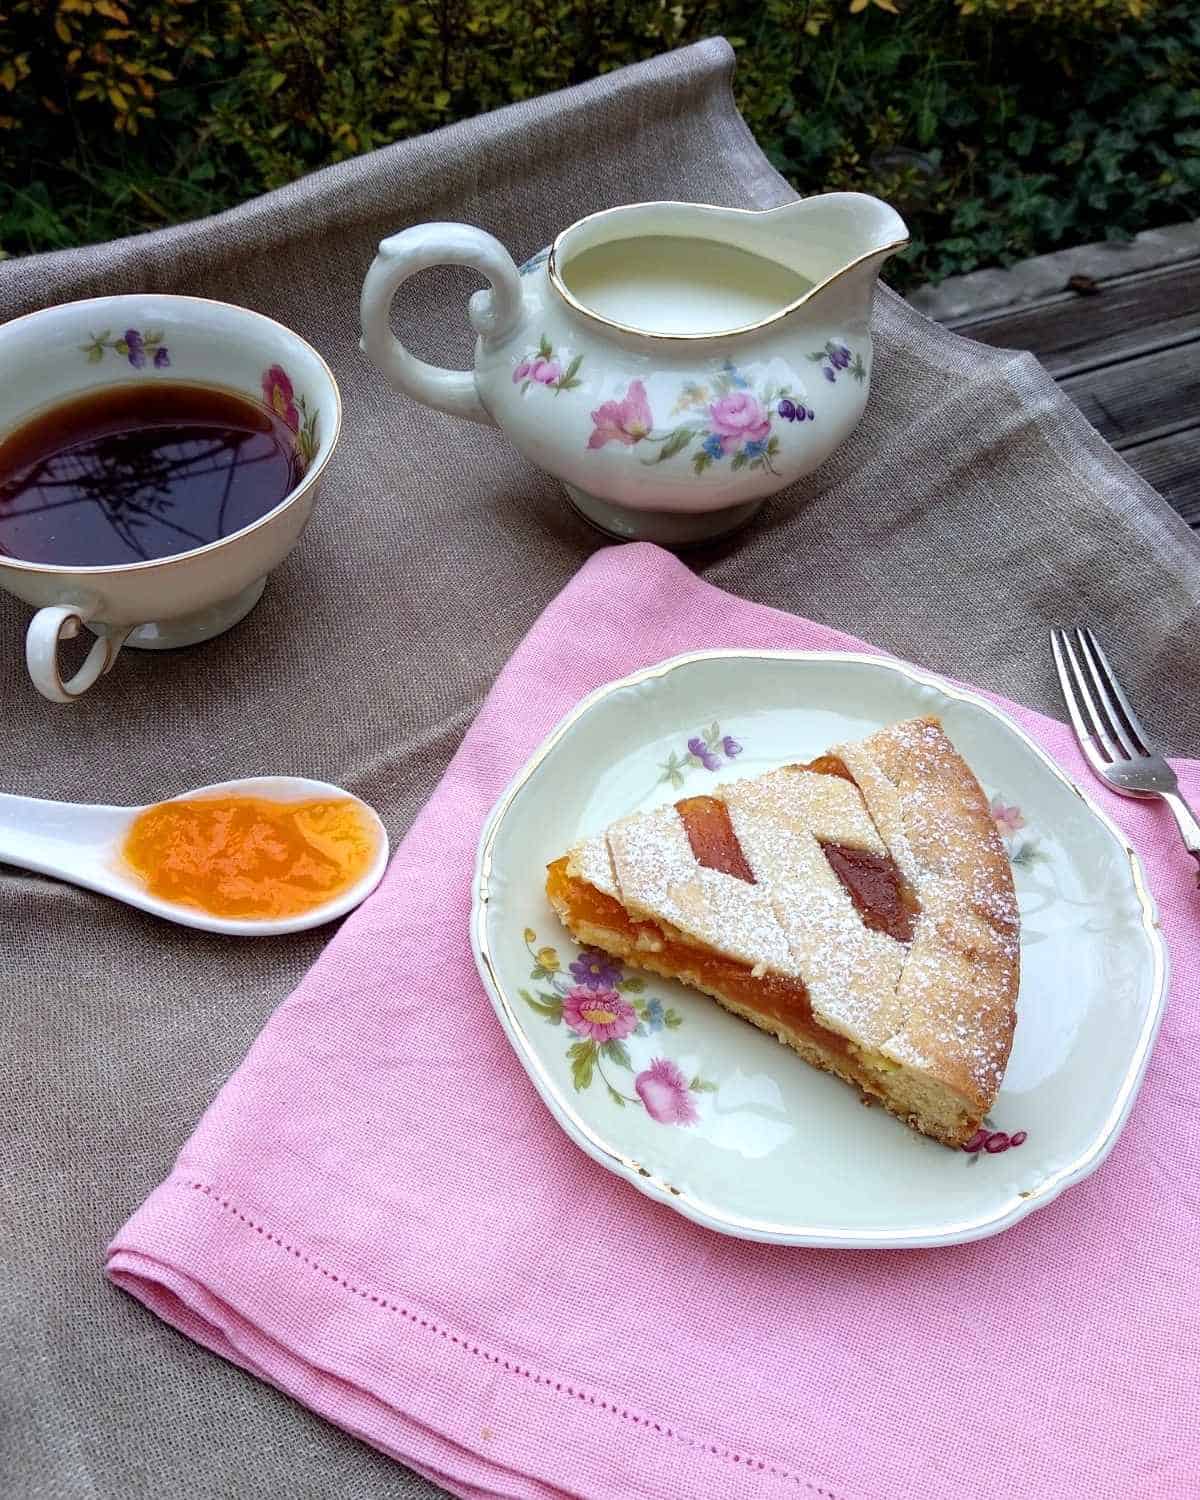 A slice of Apricots Crostata Tart on a white plate and pink linen showing the apricot jam baked inside the cake. There are a cup of coffe and some milk aside